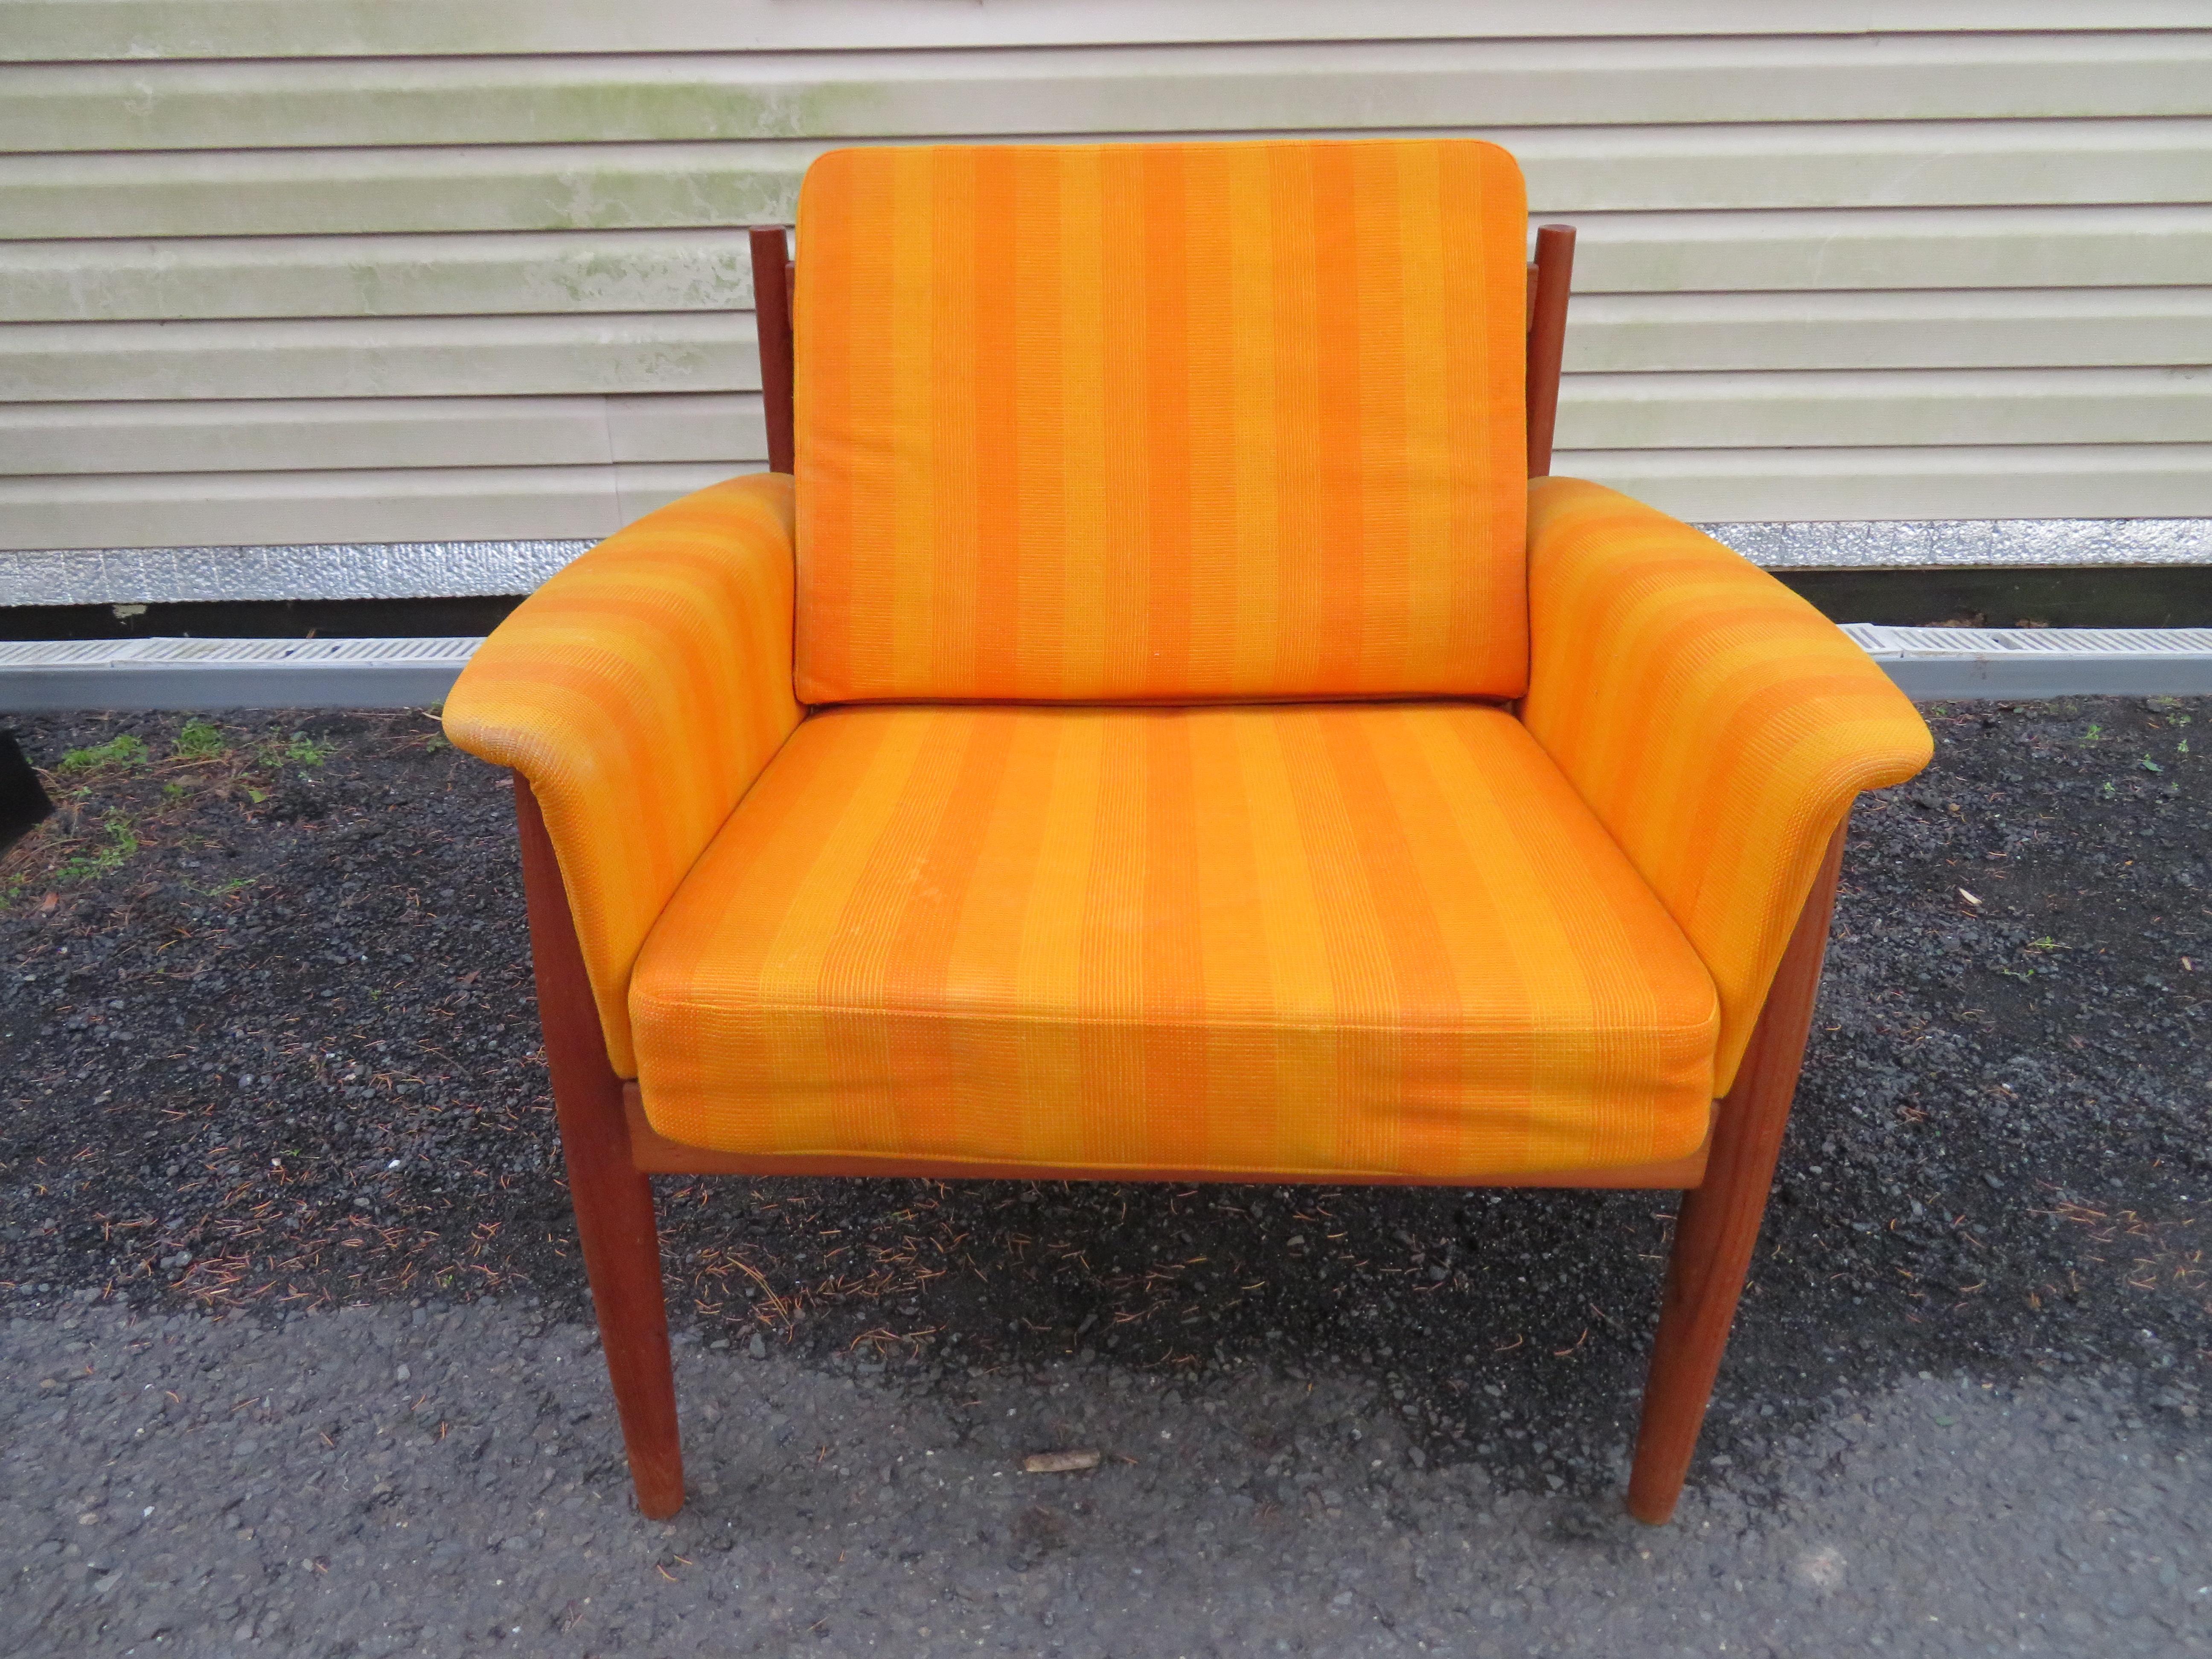 Outstanding Grete Jalk teak lounge chair. This chair retain its original orange striped woven fabric in nice vintage condition-some light spots-cleaning recommended. Very usable as is but would be spectacular in something fresh. The teak frame has a